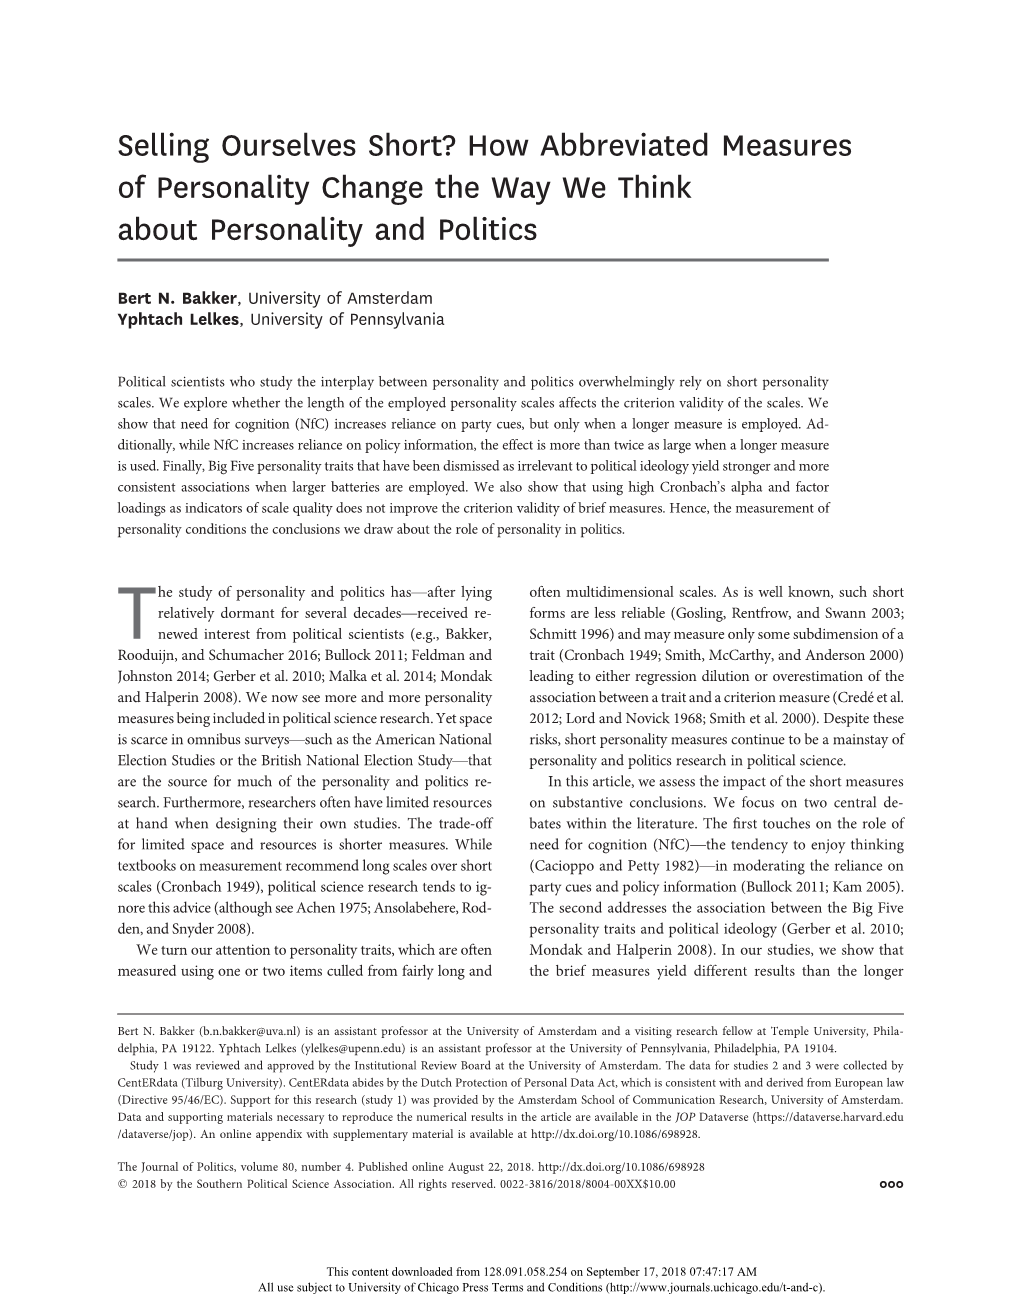 How Abbreviated Measures of Personality Change the Way We Think About Personality and Politics